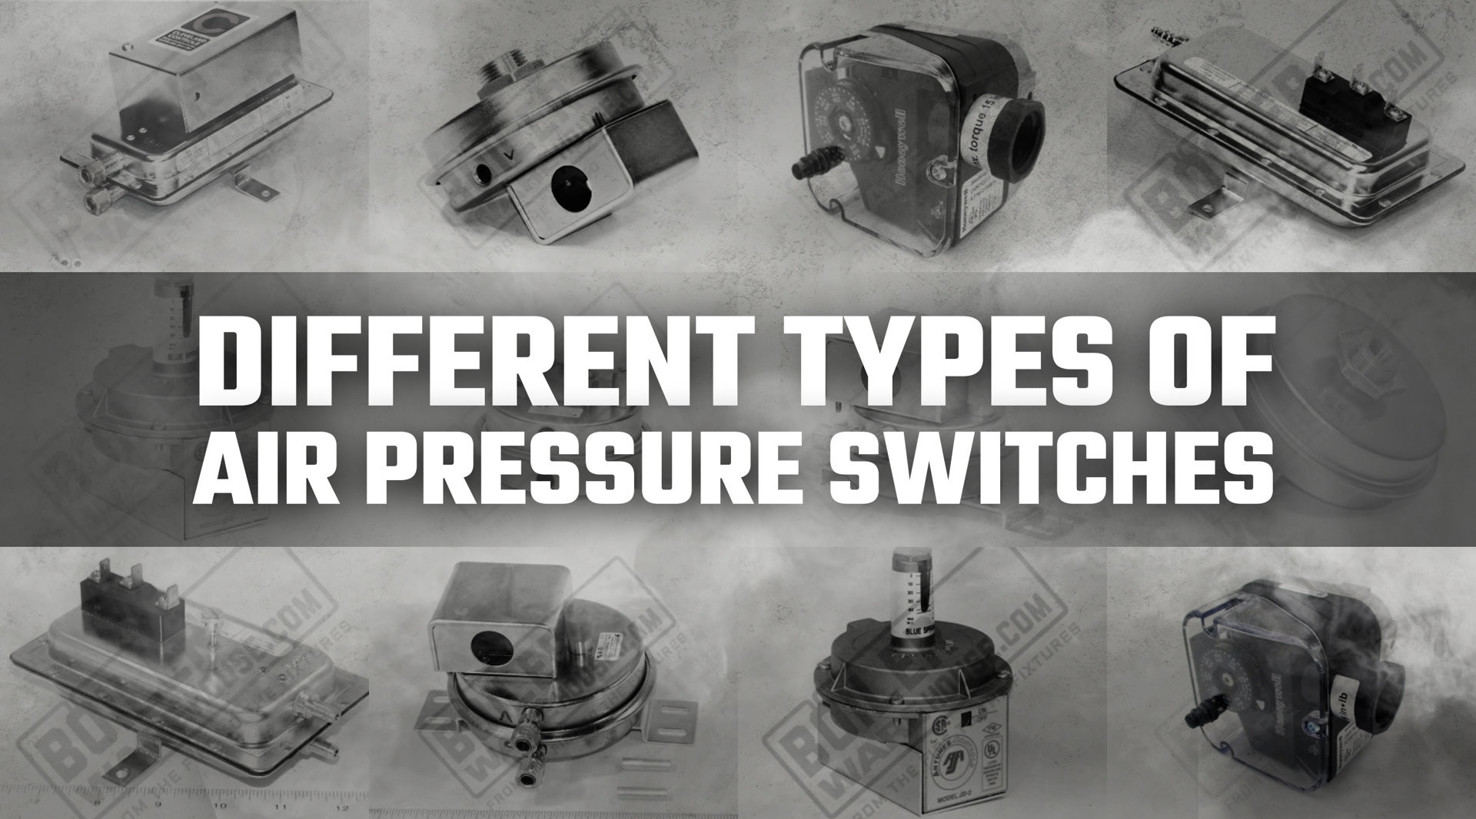 Different Types of Air Pressure Switches